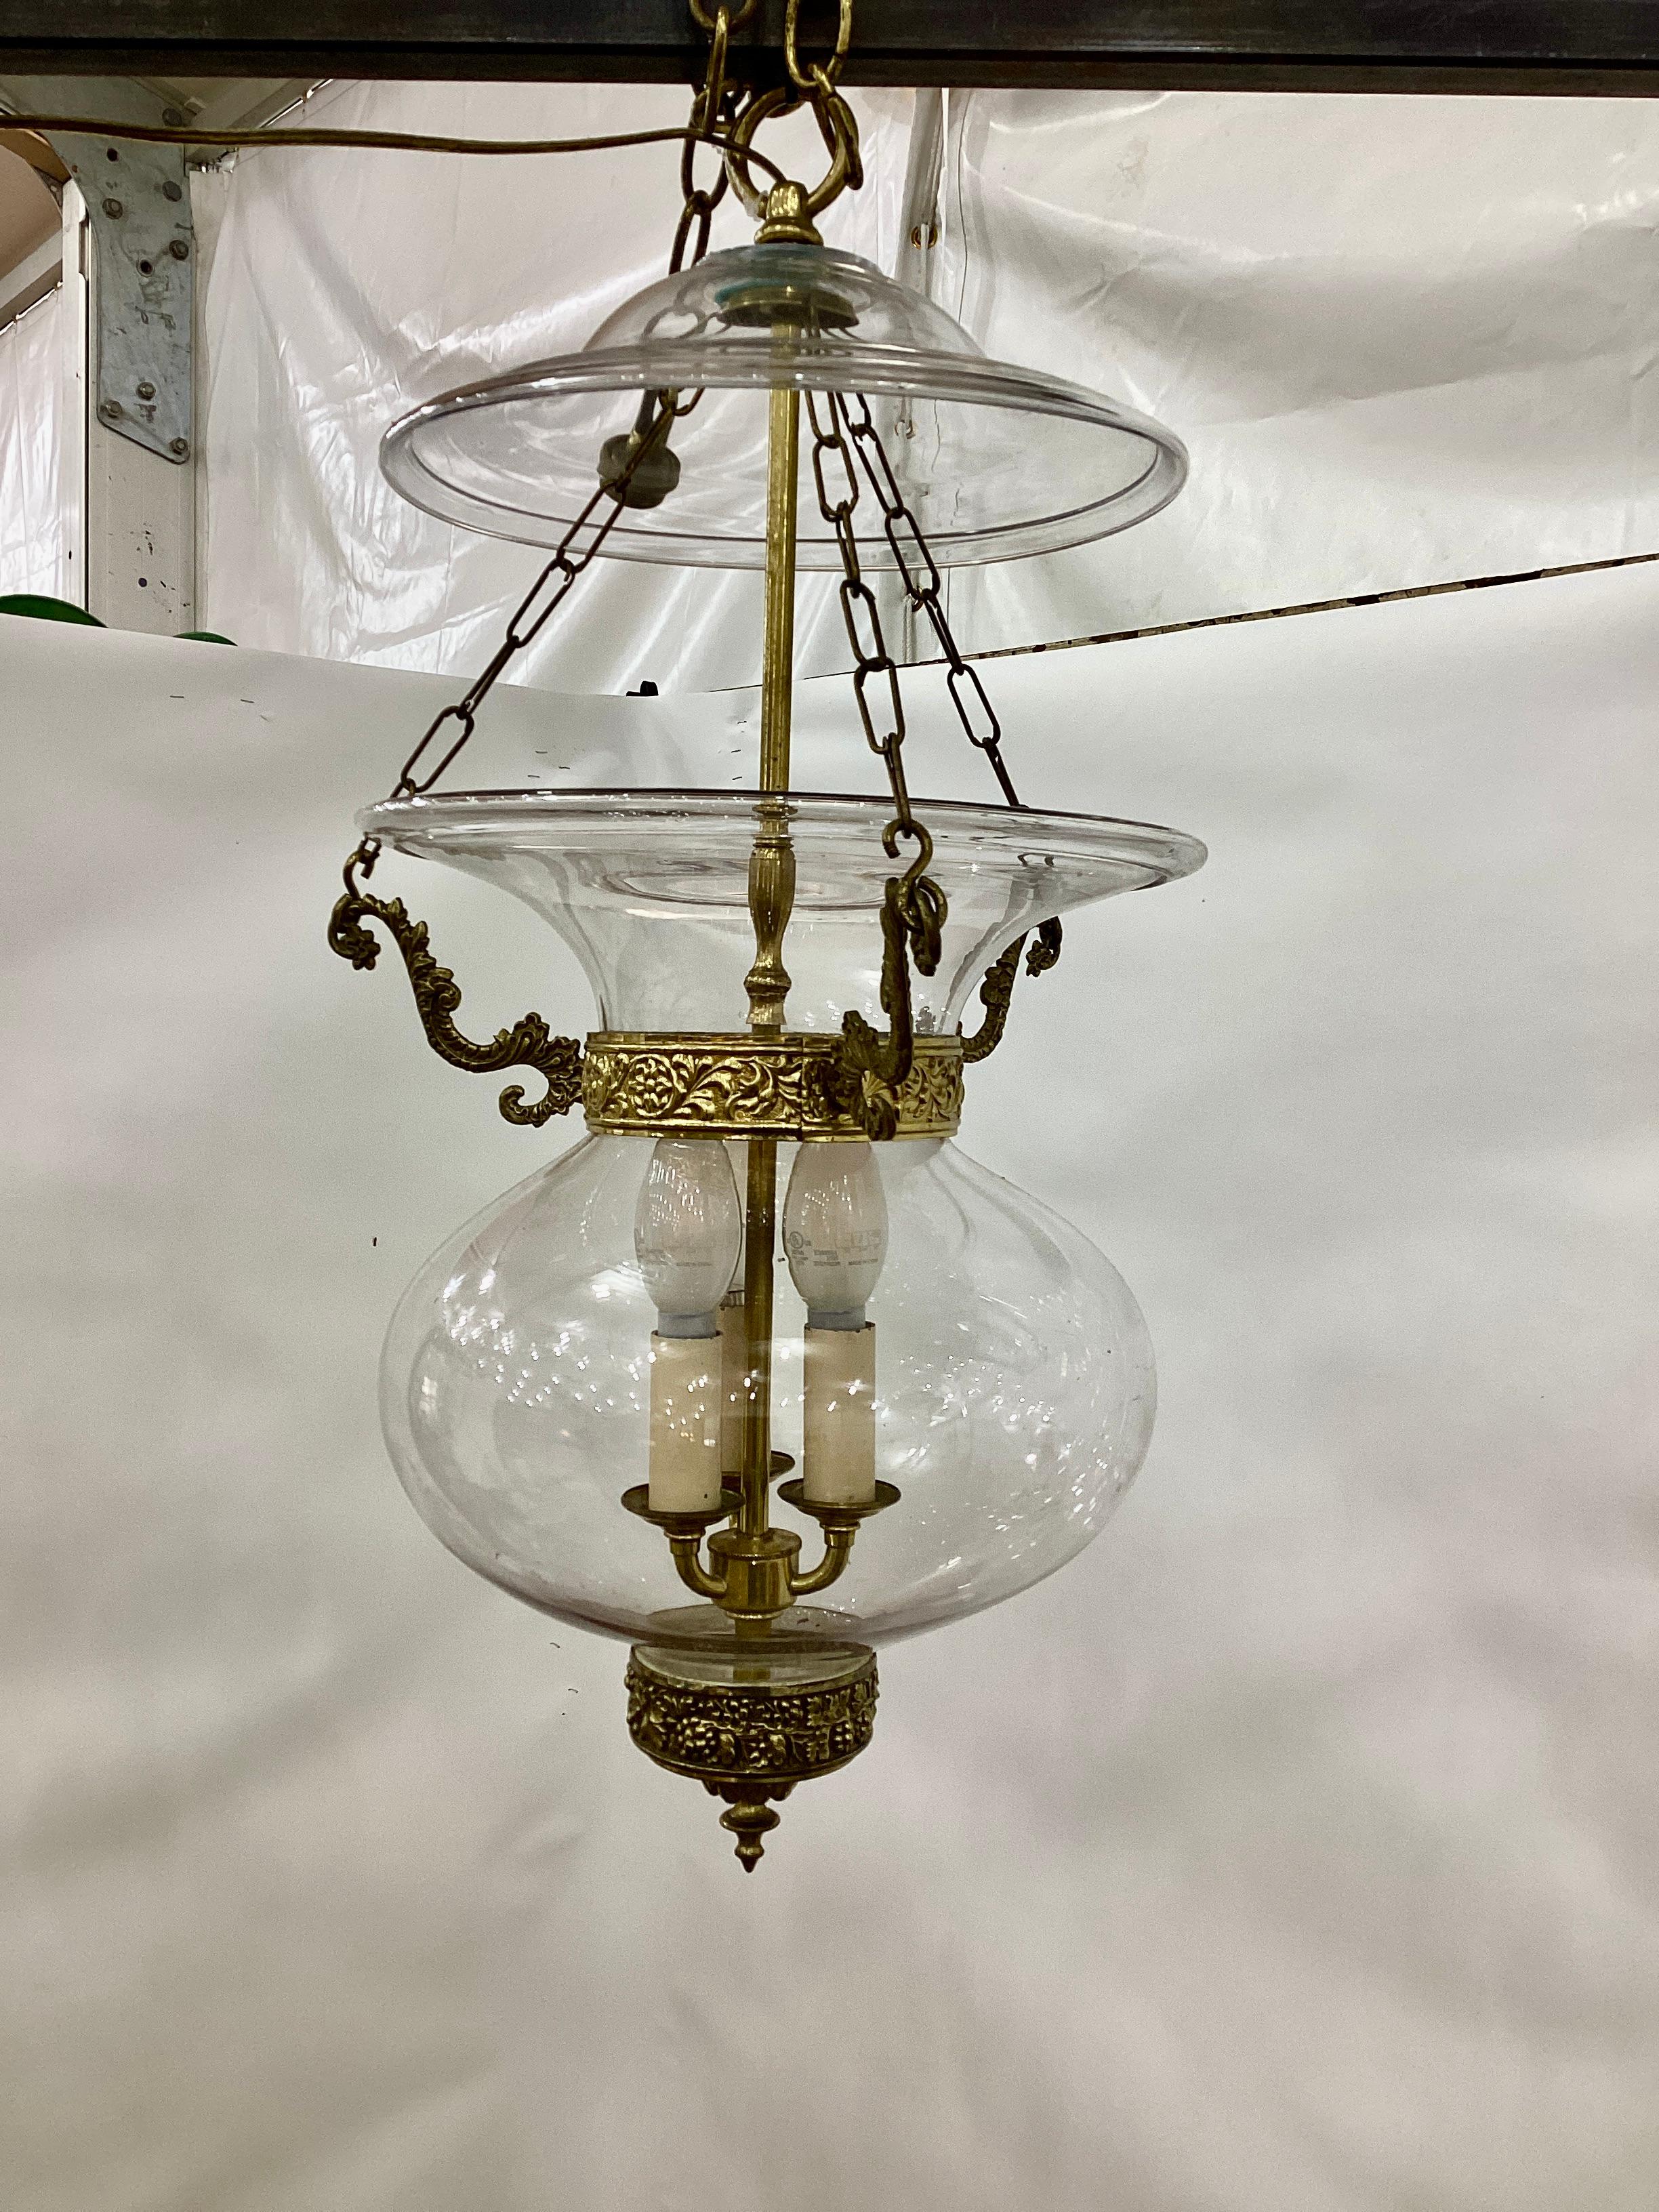 An early 19th century English Regency clear glass bell jar lantern with brass collar circa 1830. The lantern is fitted with a three chain drop and a smoke bell. Lantern is wired and in working condition.